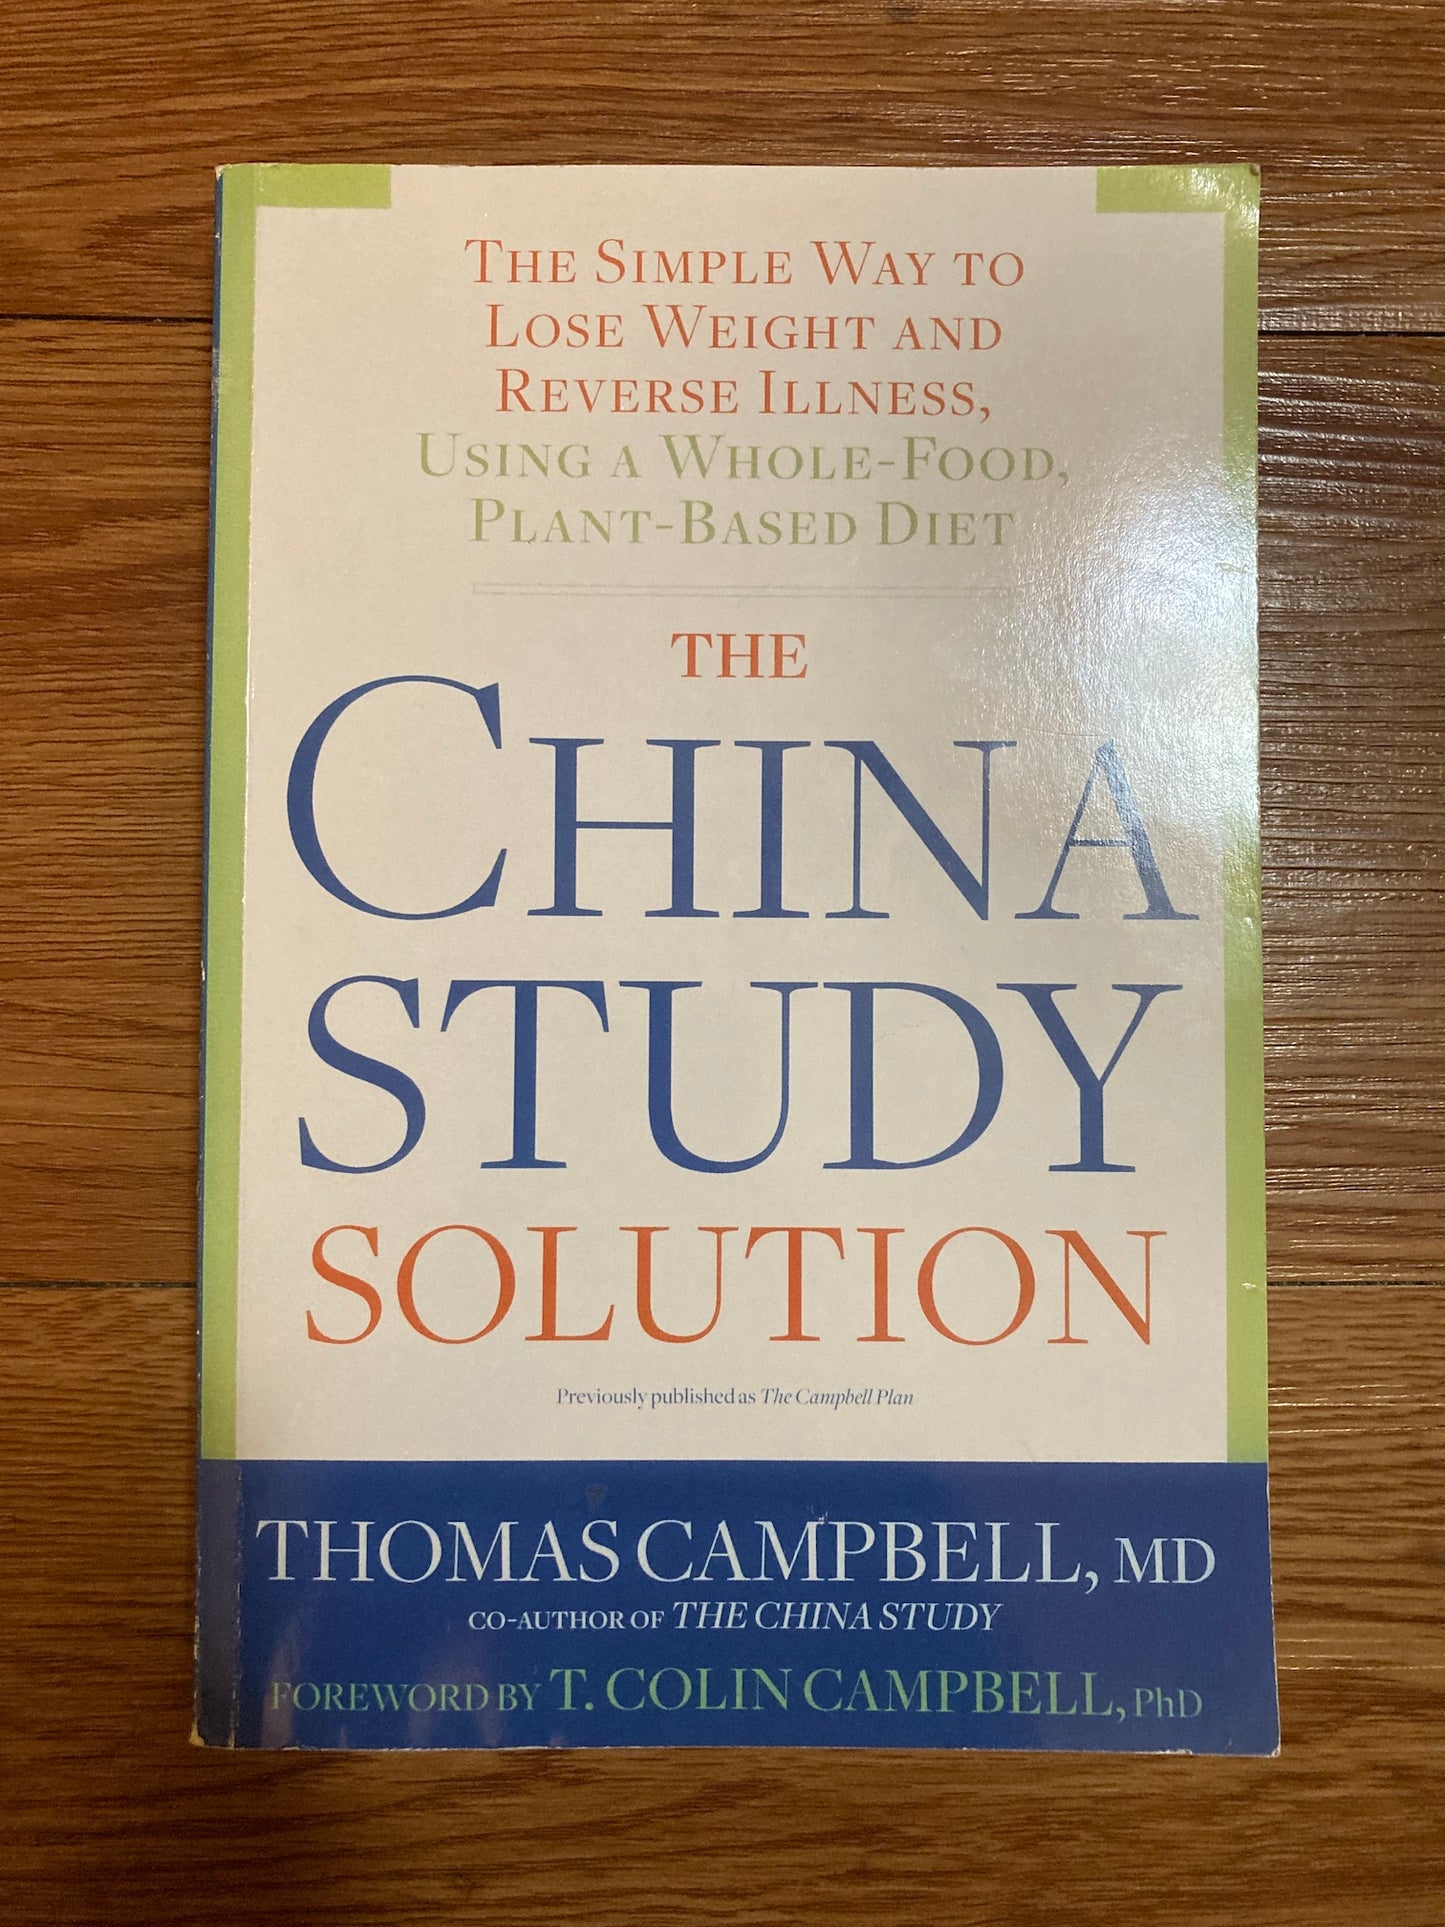 The China Study Solution: The Simple Way to Lose Weight